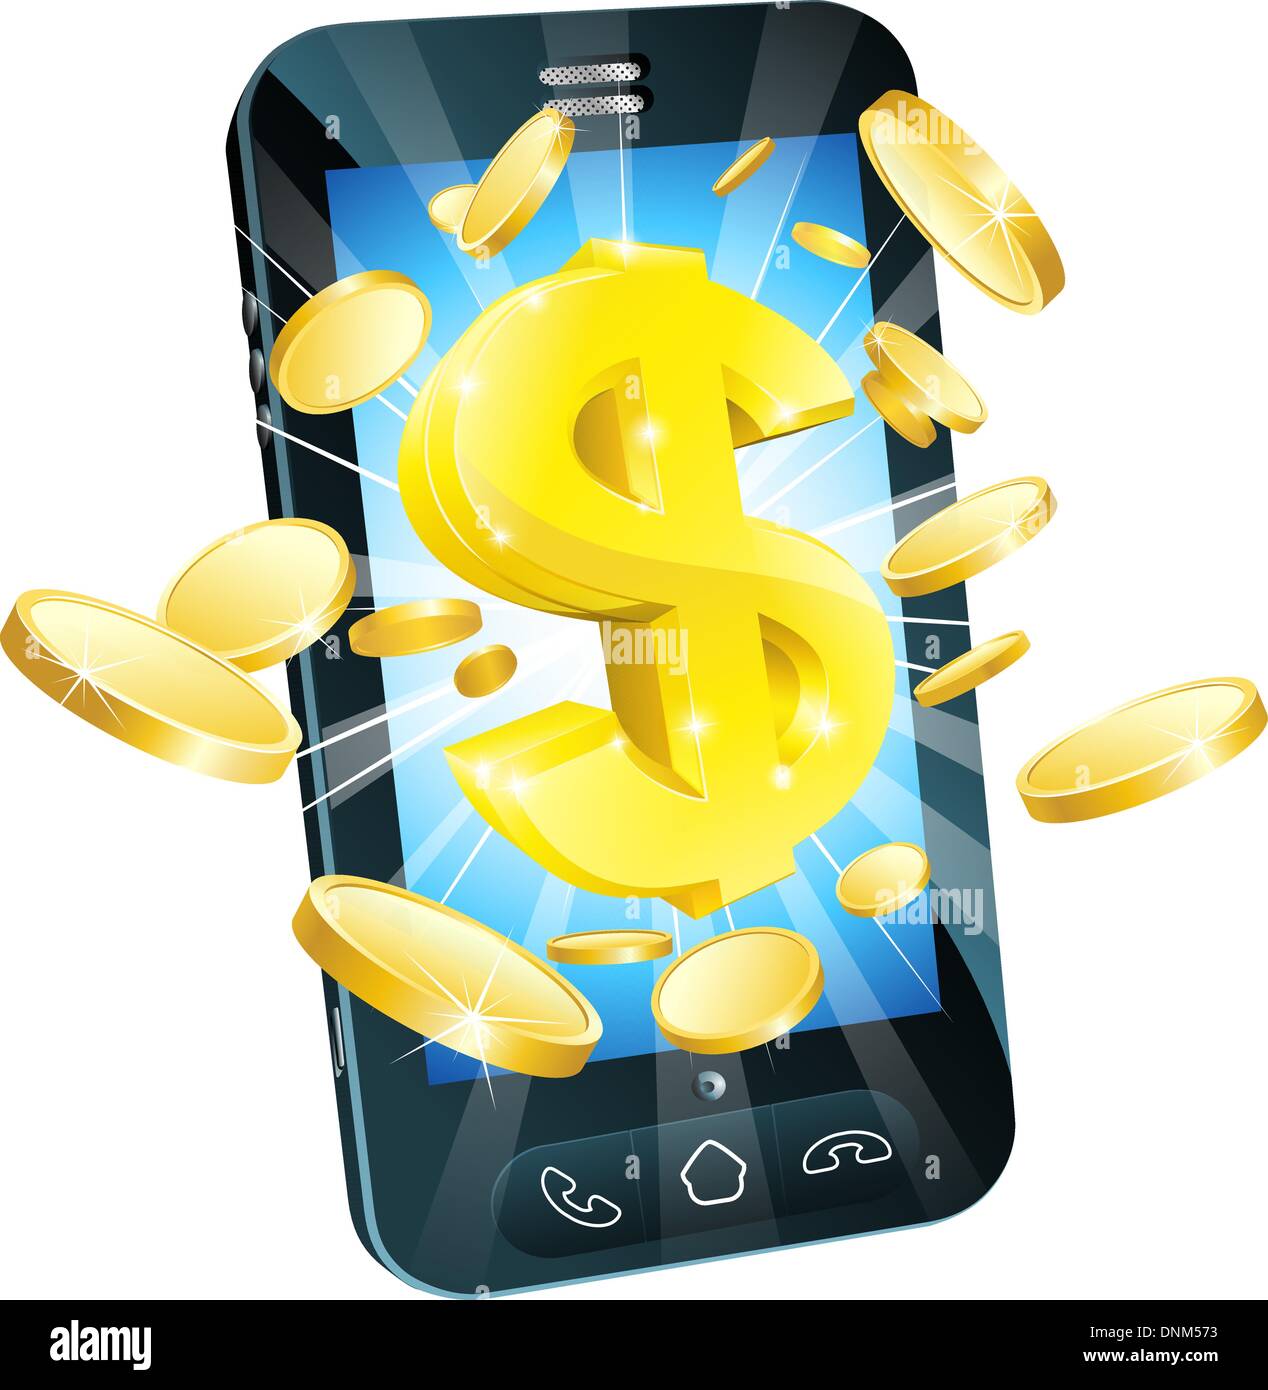 Dollar money phone concept illustration of mobile cell phone with gold dollar and coins Stock Vector